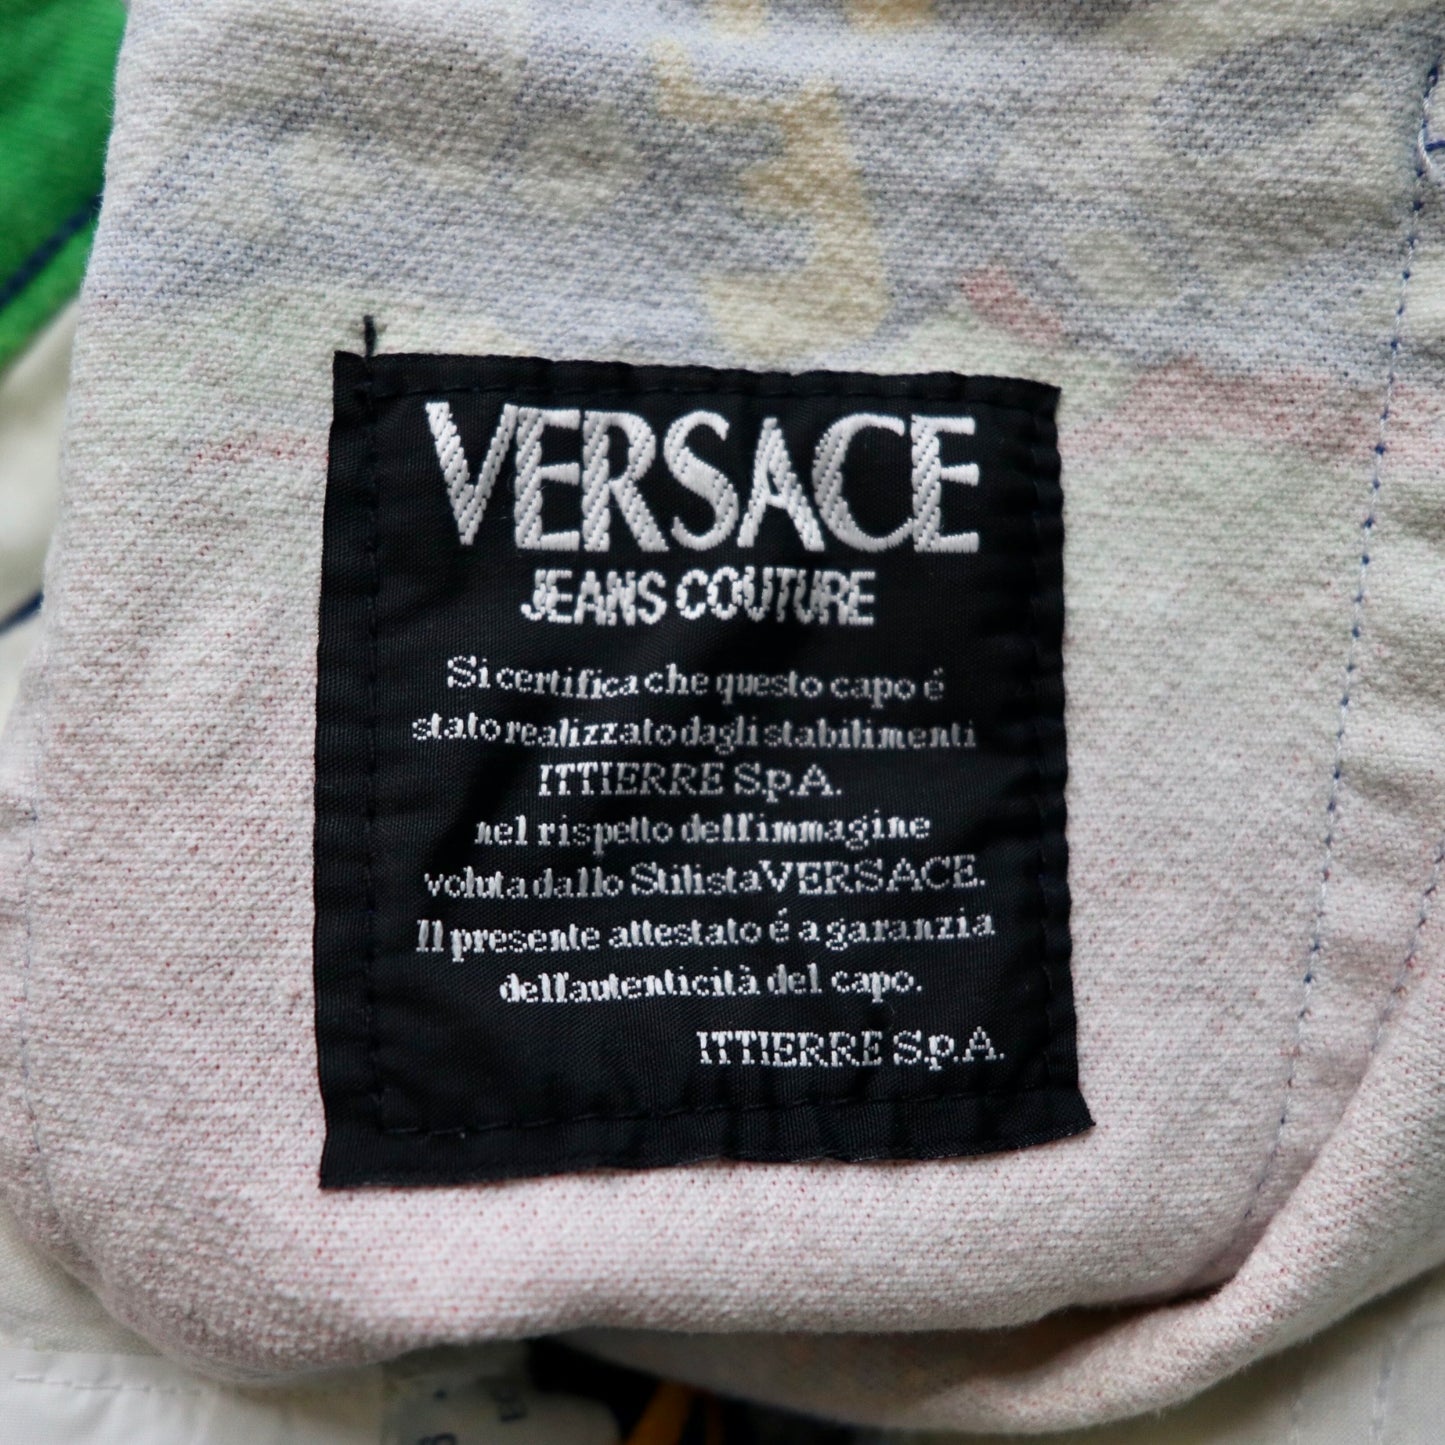 VERSACE JEANS COUTURE クレイジーパターンパンツ 26 ストライプ 総柄